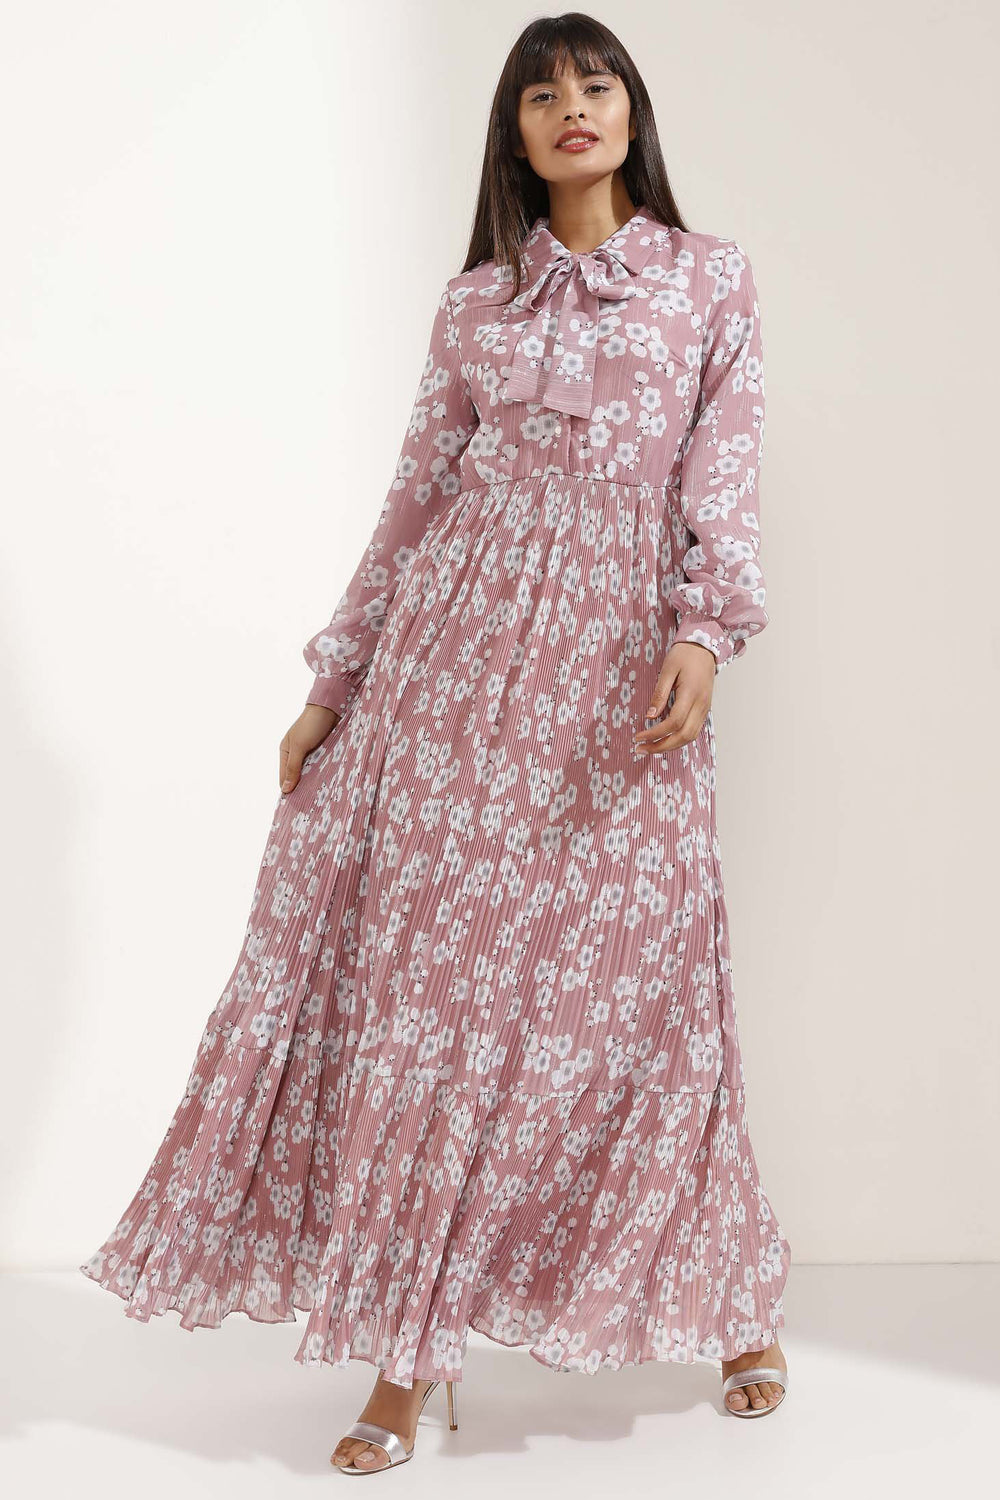 Store WF Pale Pink and White Flower Patterned Long Dress Modest Maxi Loose Fitting Dress with Bow and Sleeves  in 100% Polyester